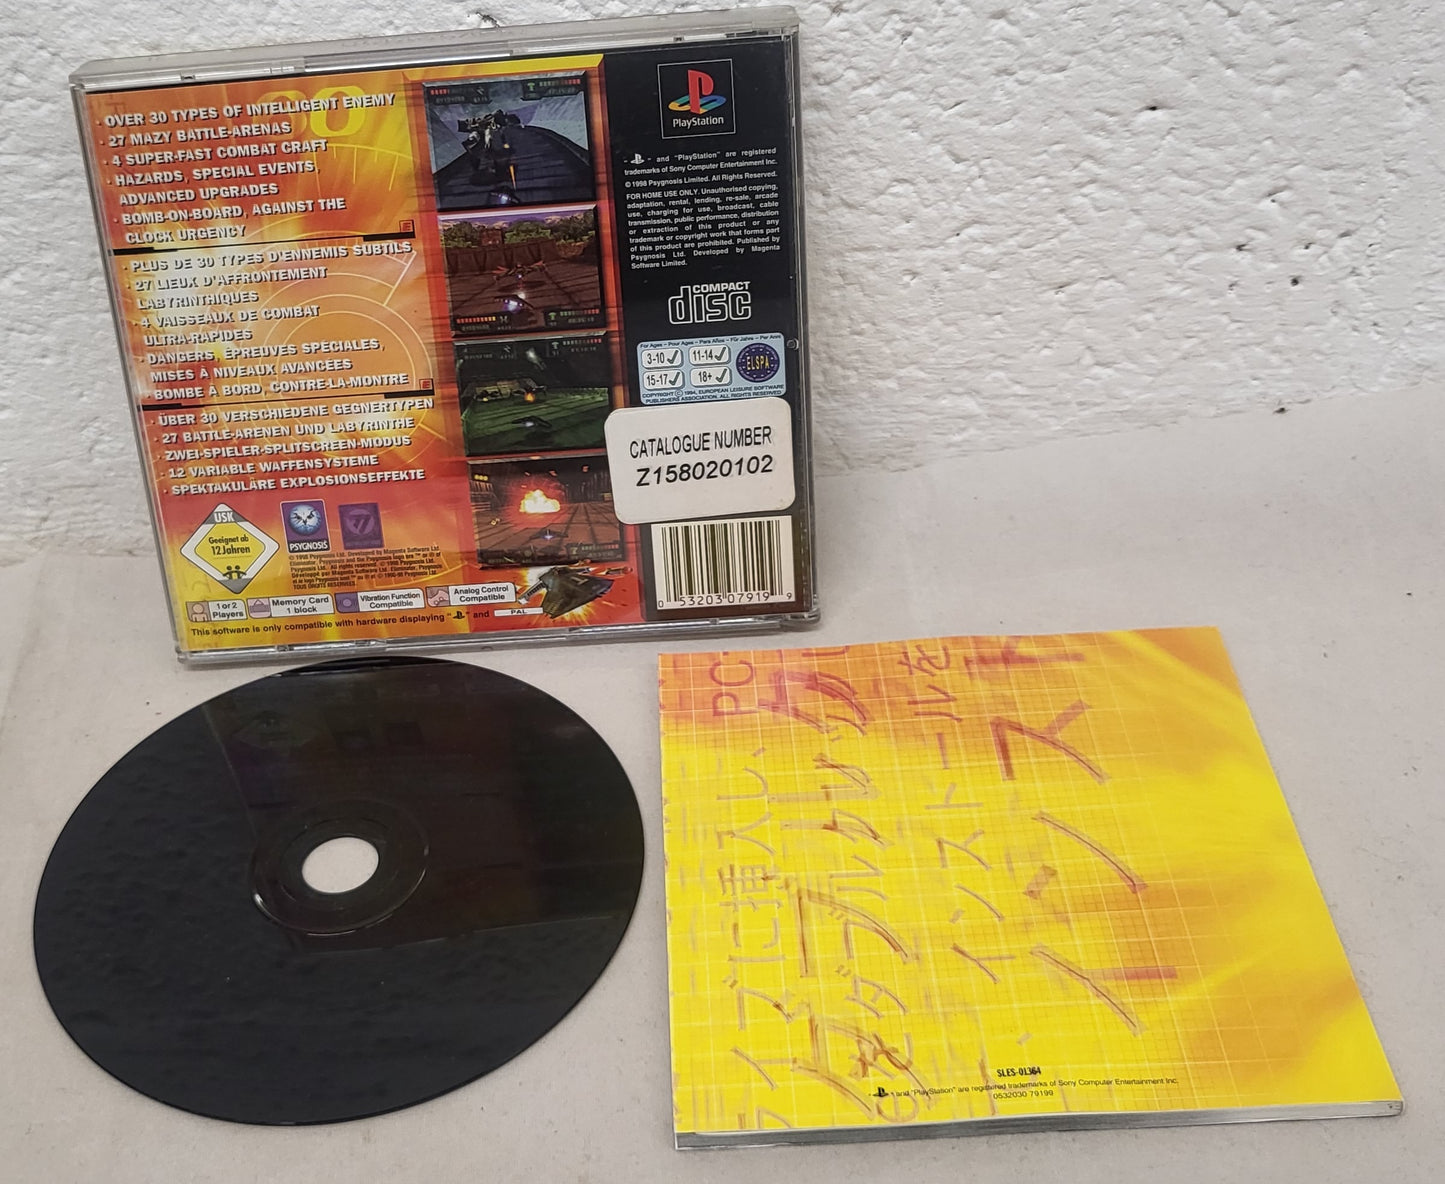 Eliminator Sony Playstation 1 (PS1) RARE Game